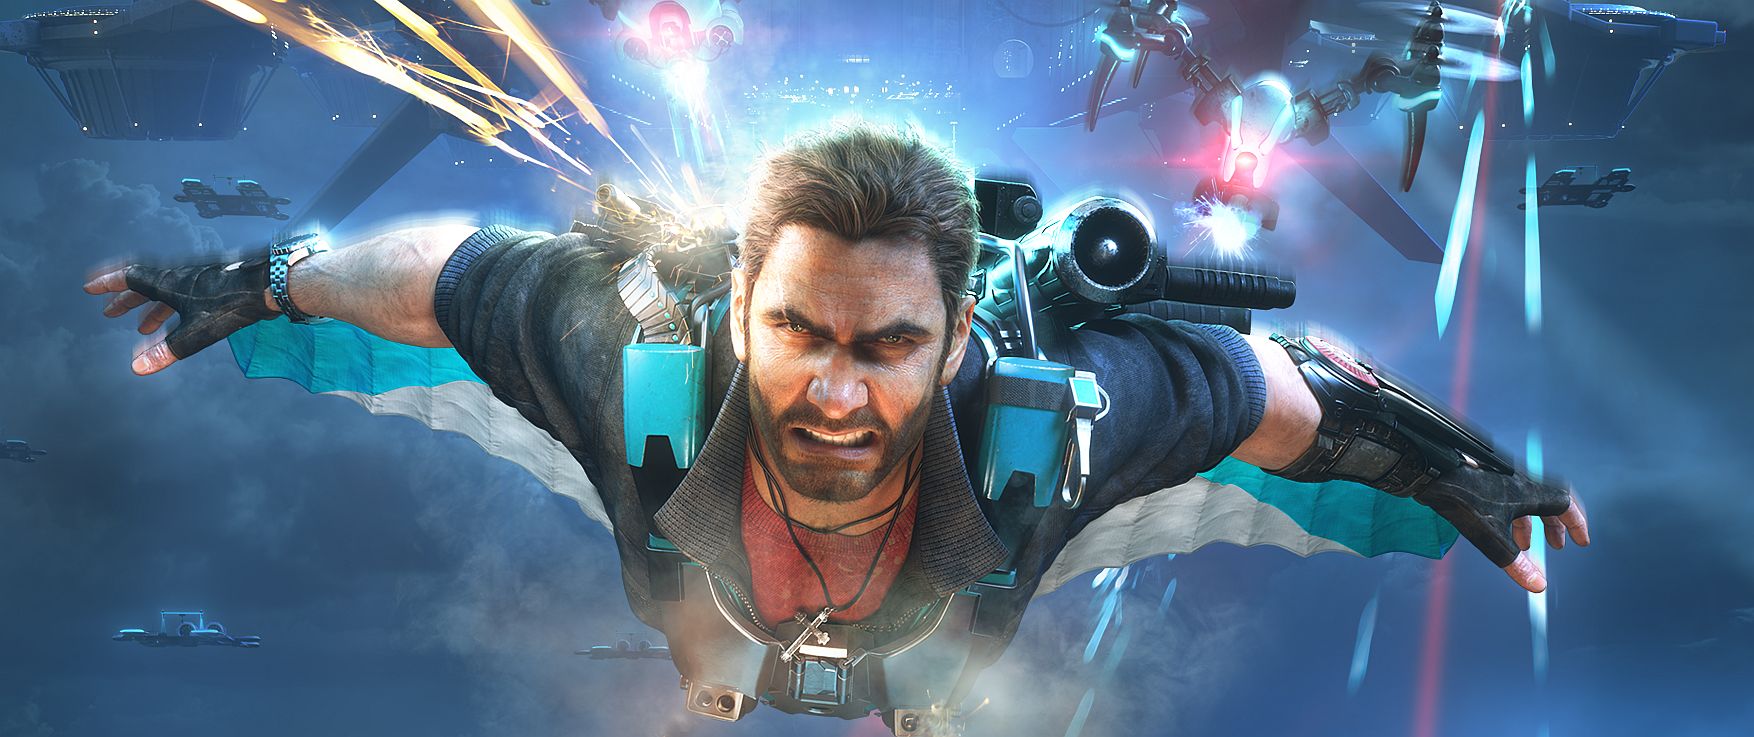 Image for Just Cause 3 is free to play this weekend with Xbox Live Gold